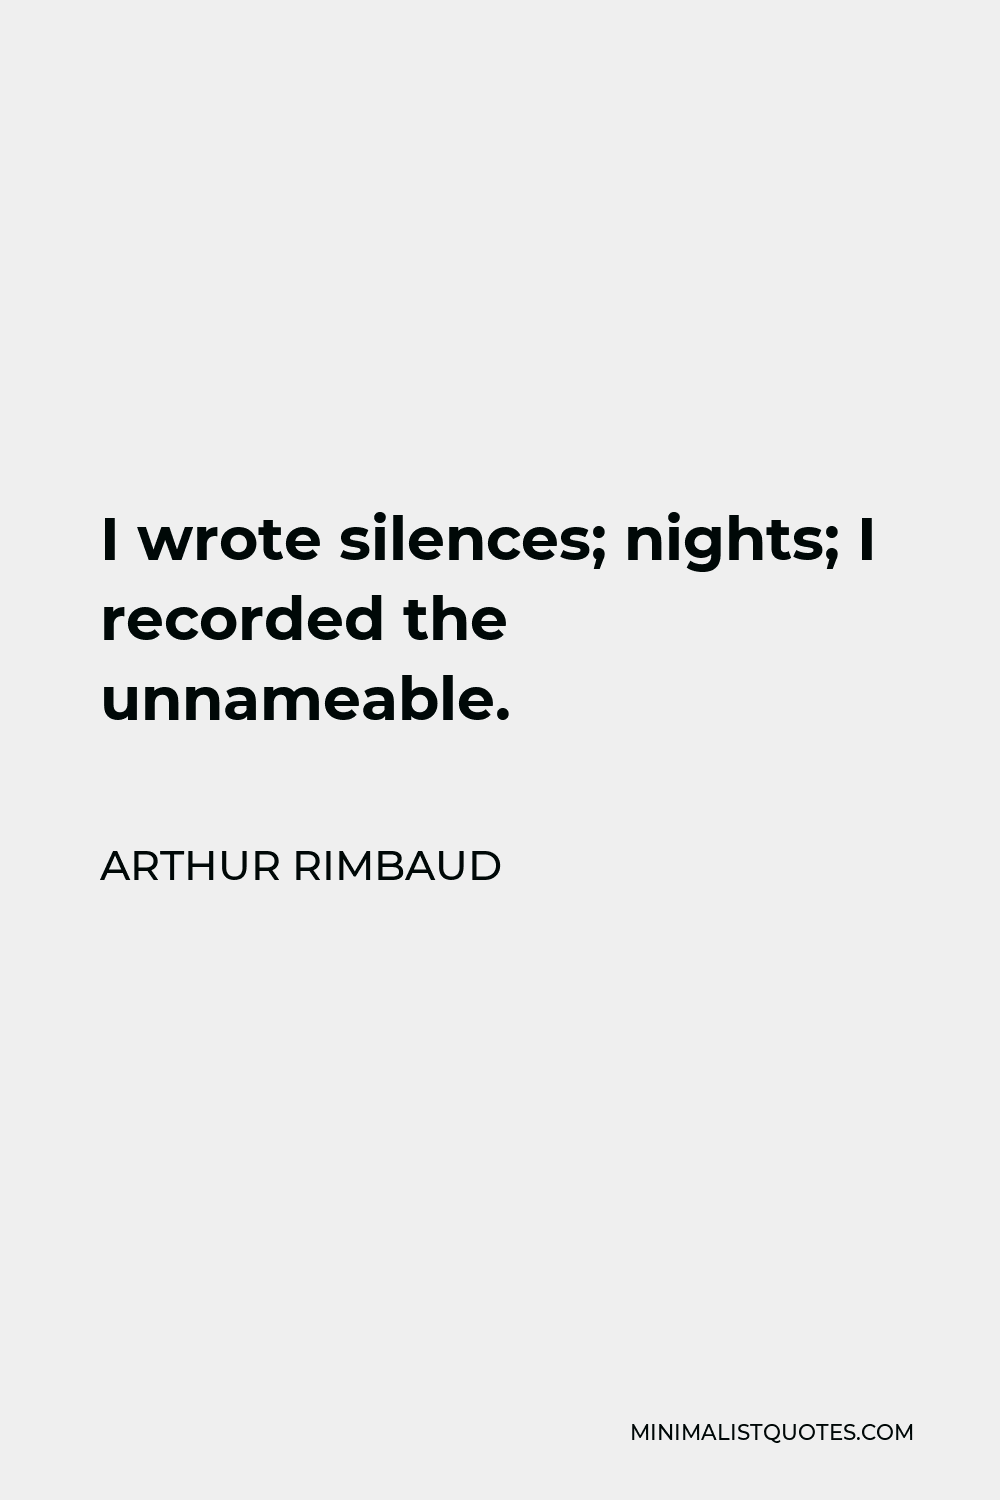 Arthur Rimbaud Quote - I wrote silences; nights; I recorded the unnameable.